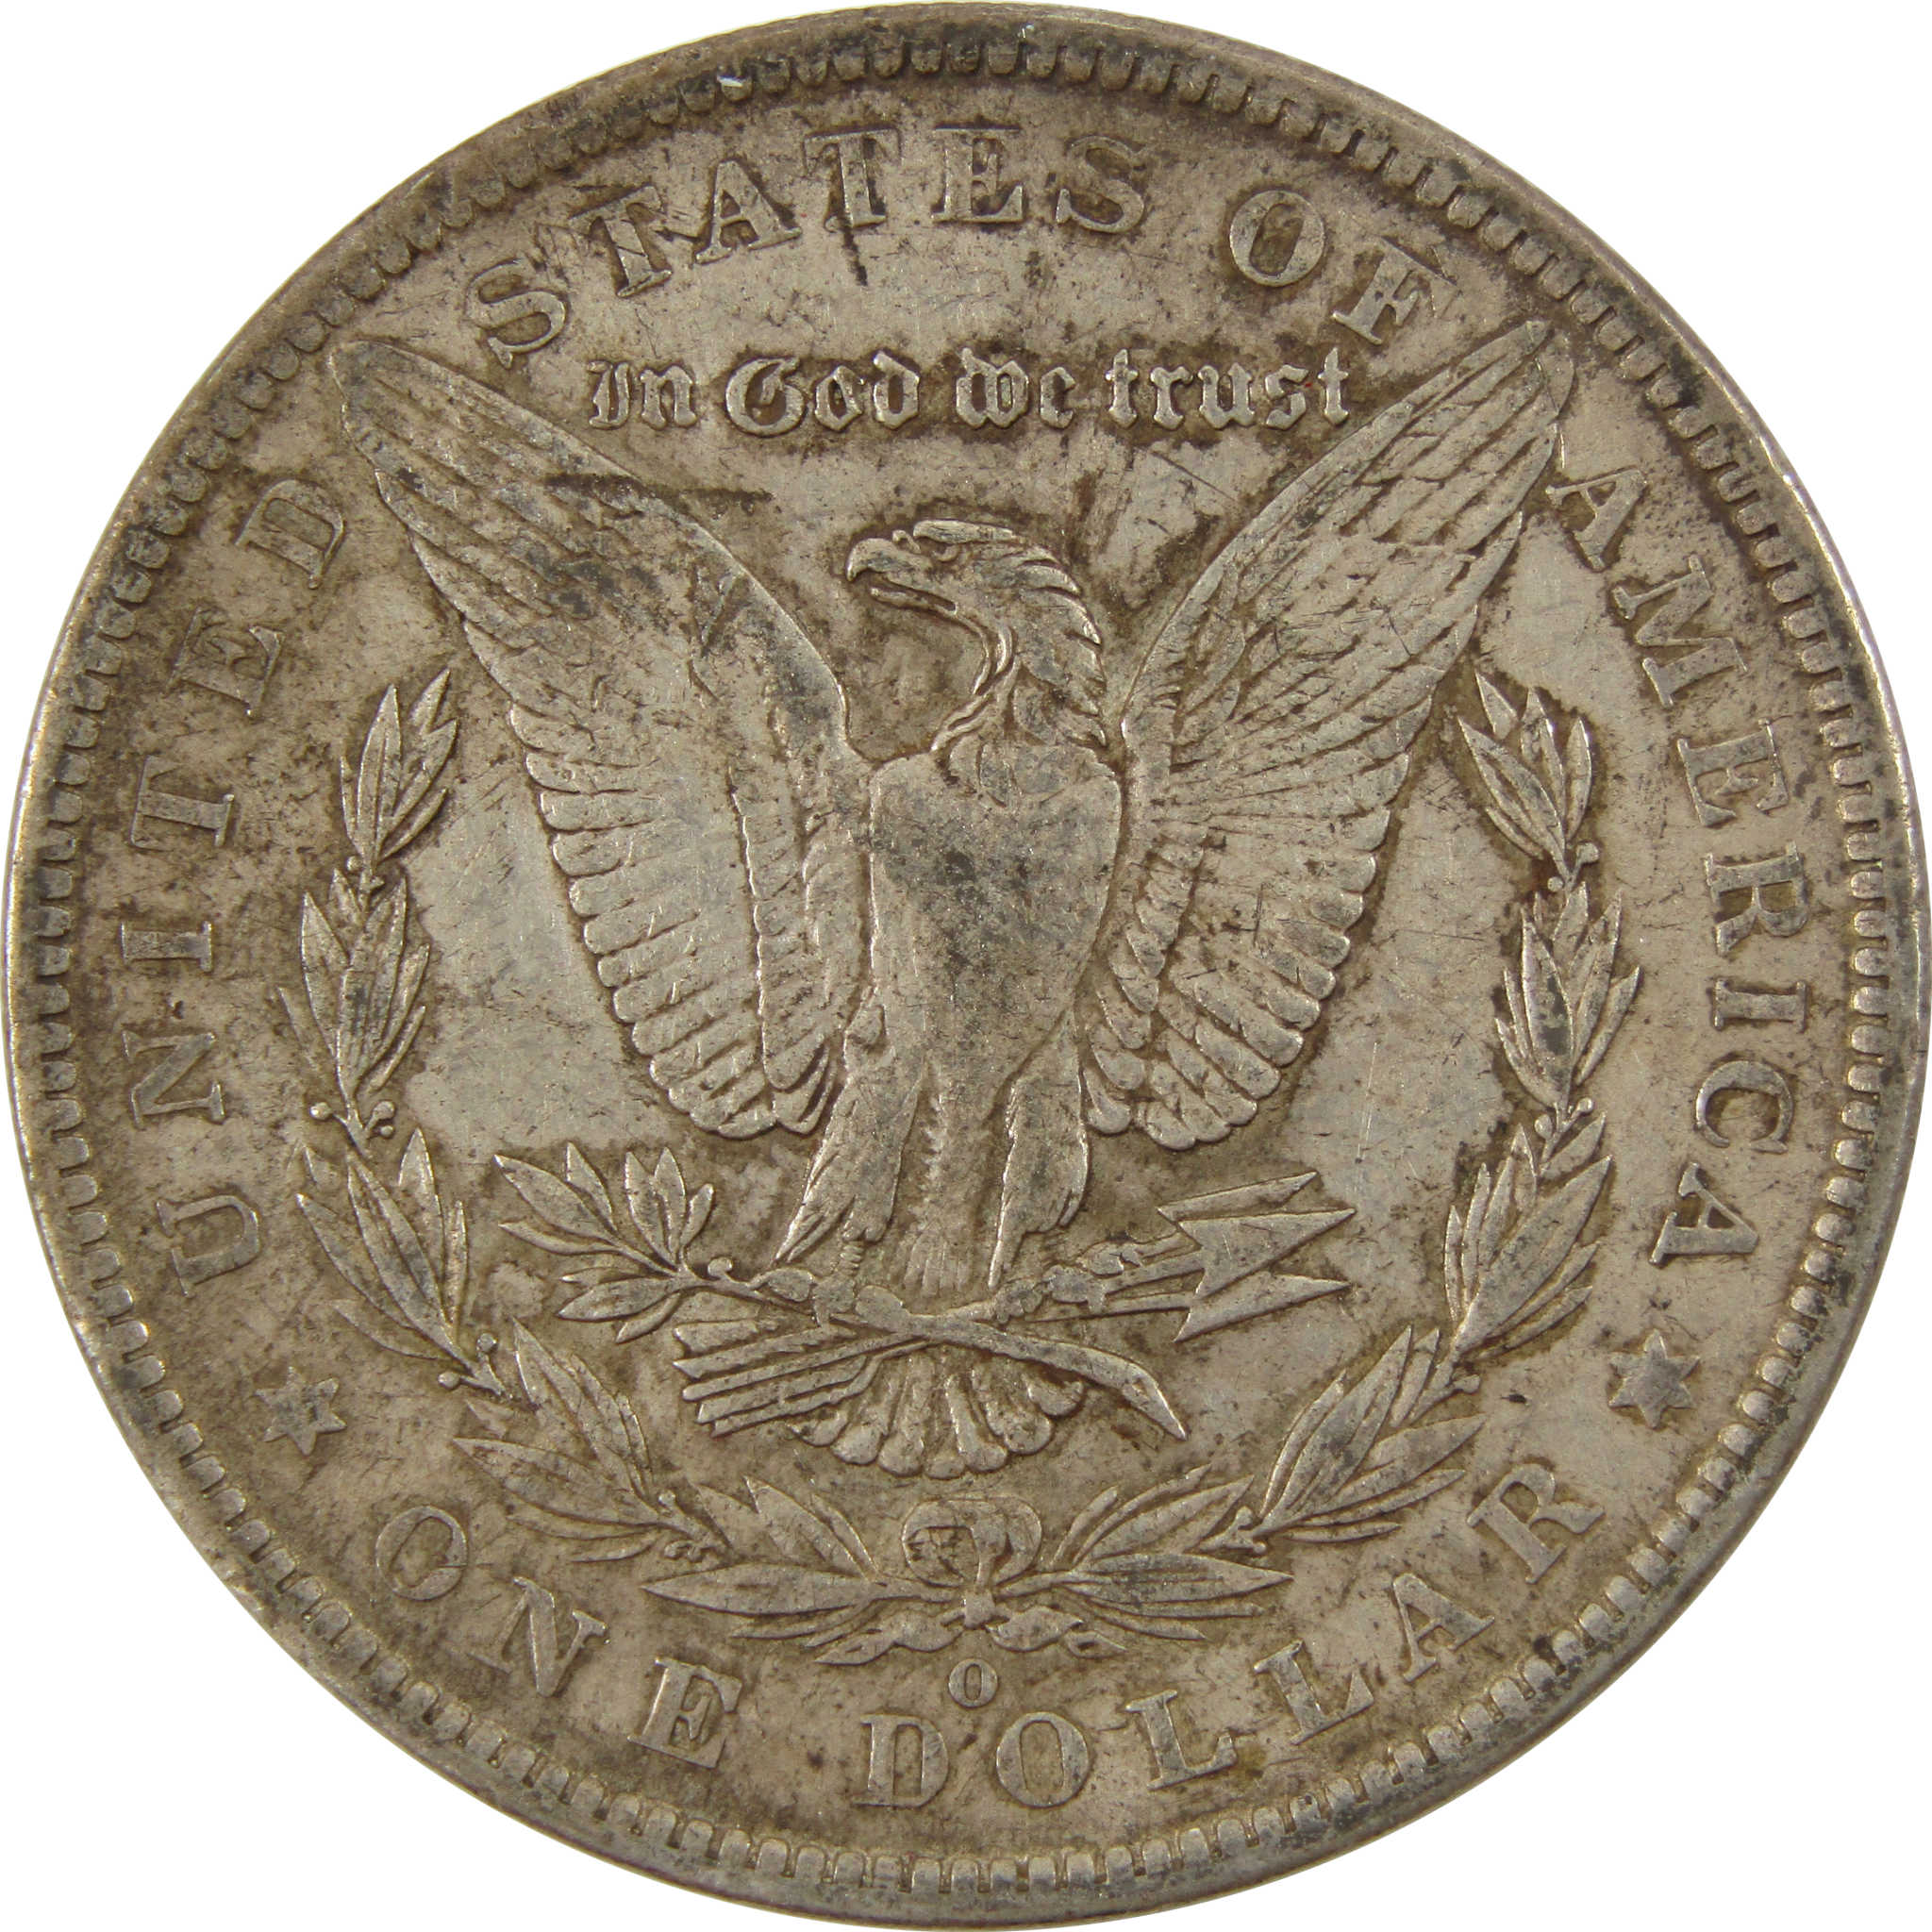 1886 O Morgan Dollar XF EF Extremely Fine 90% Silver $1 Coin SKU:I8005 - Morgan coin - Morgan silver dollar - Morgan silver dollar for sale - Profile Coins &amp; Collectibles